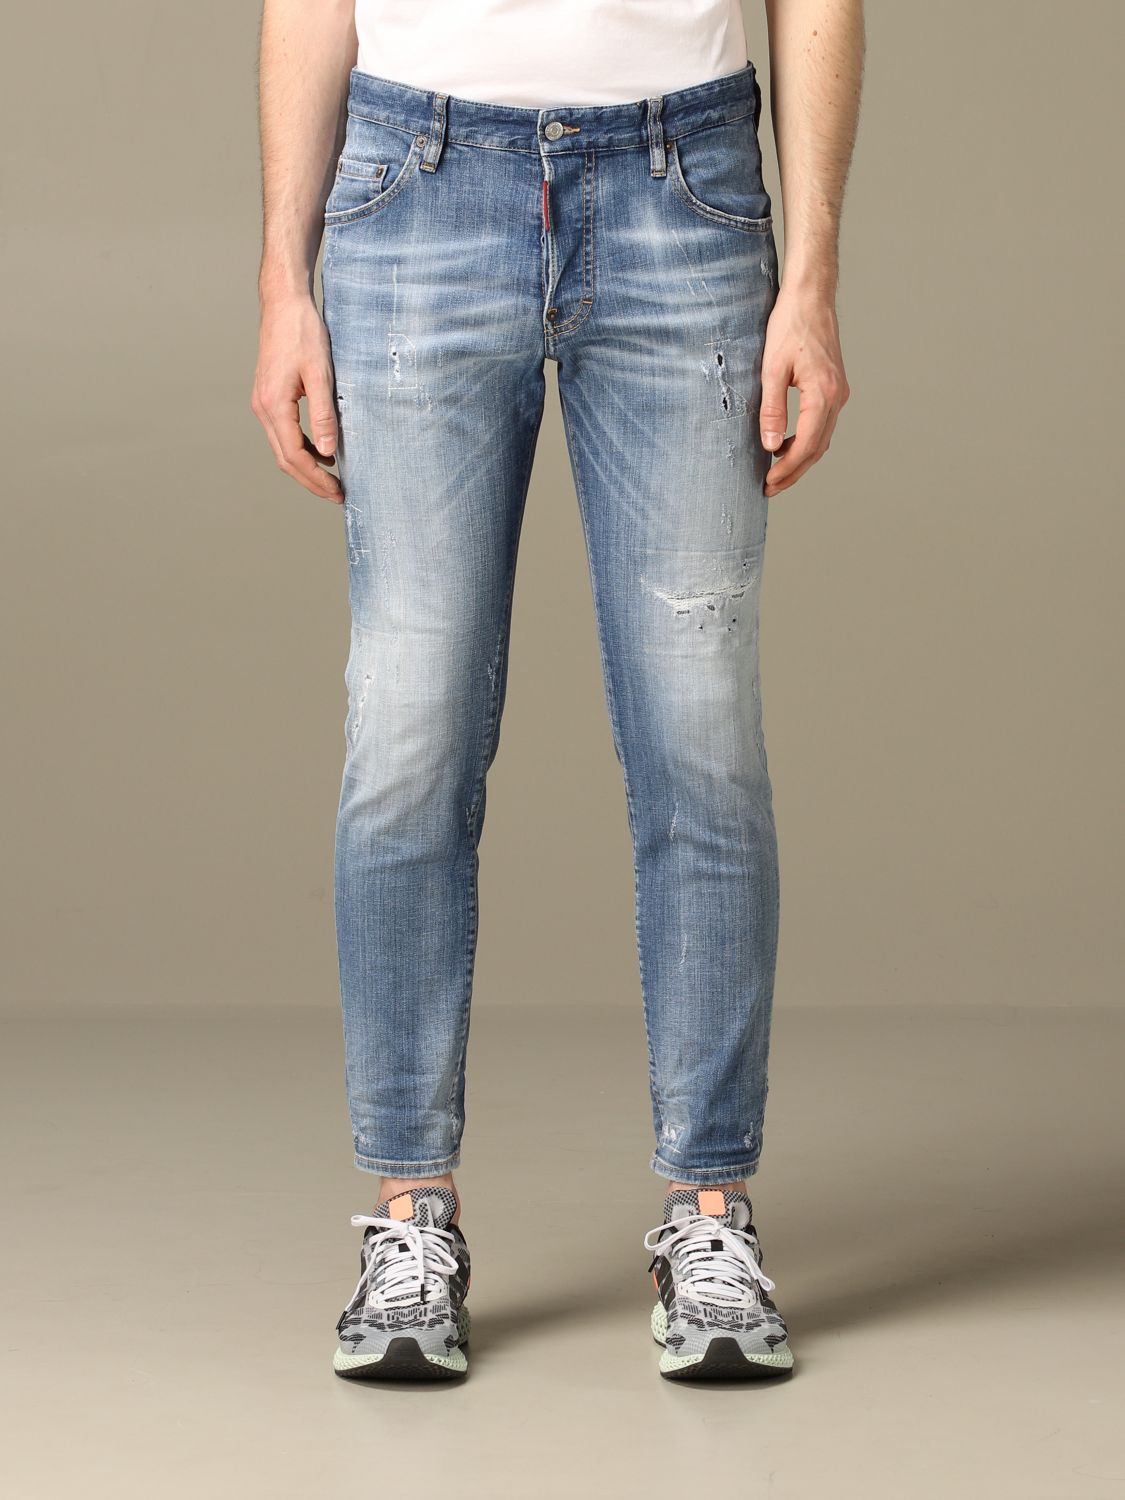 dsquared2 jeans homme 2018